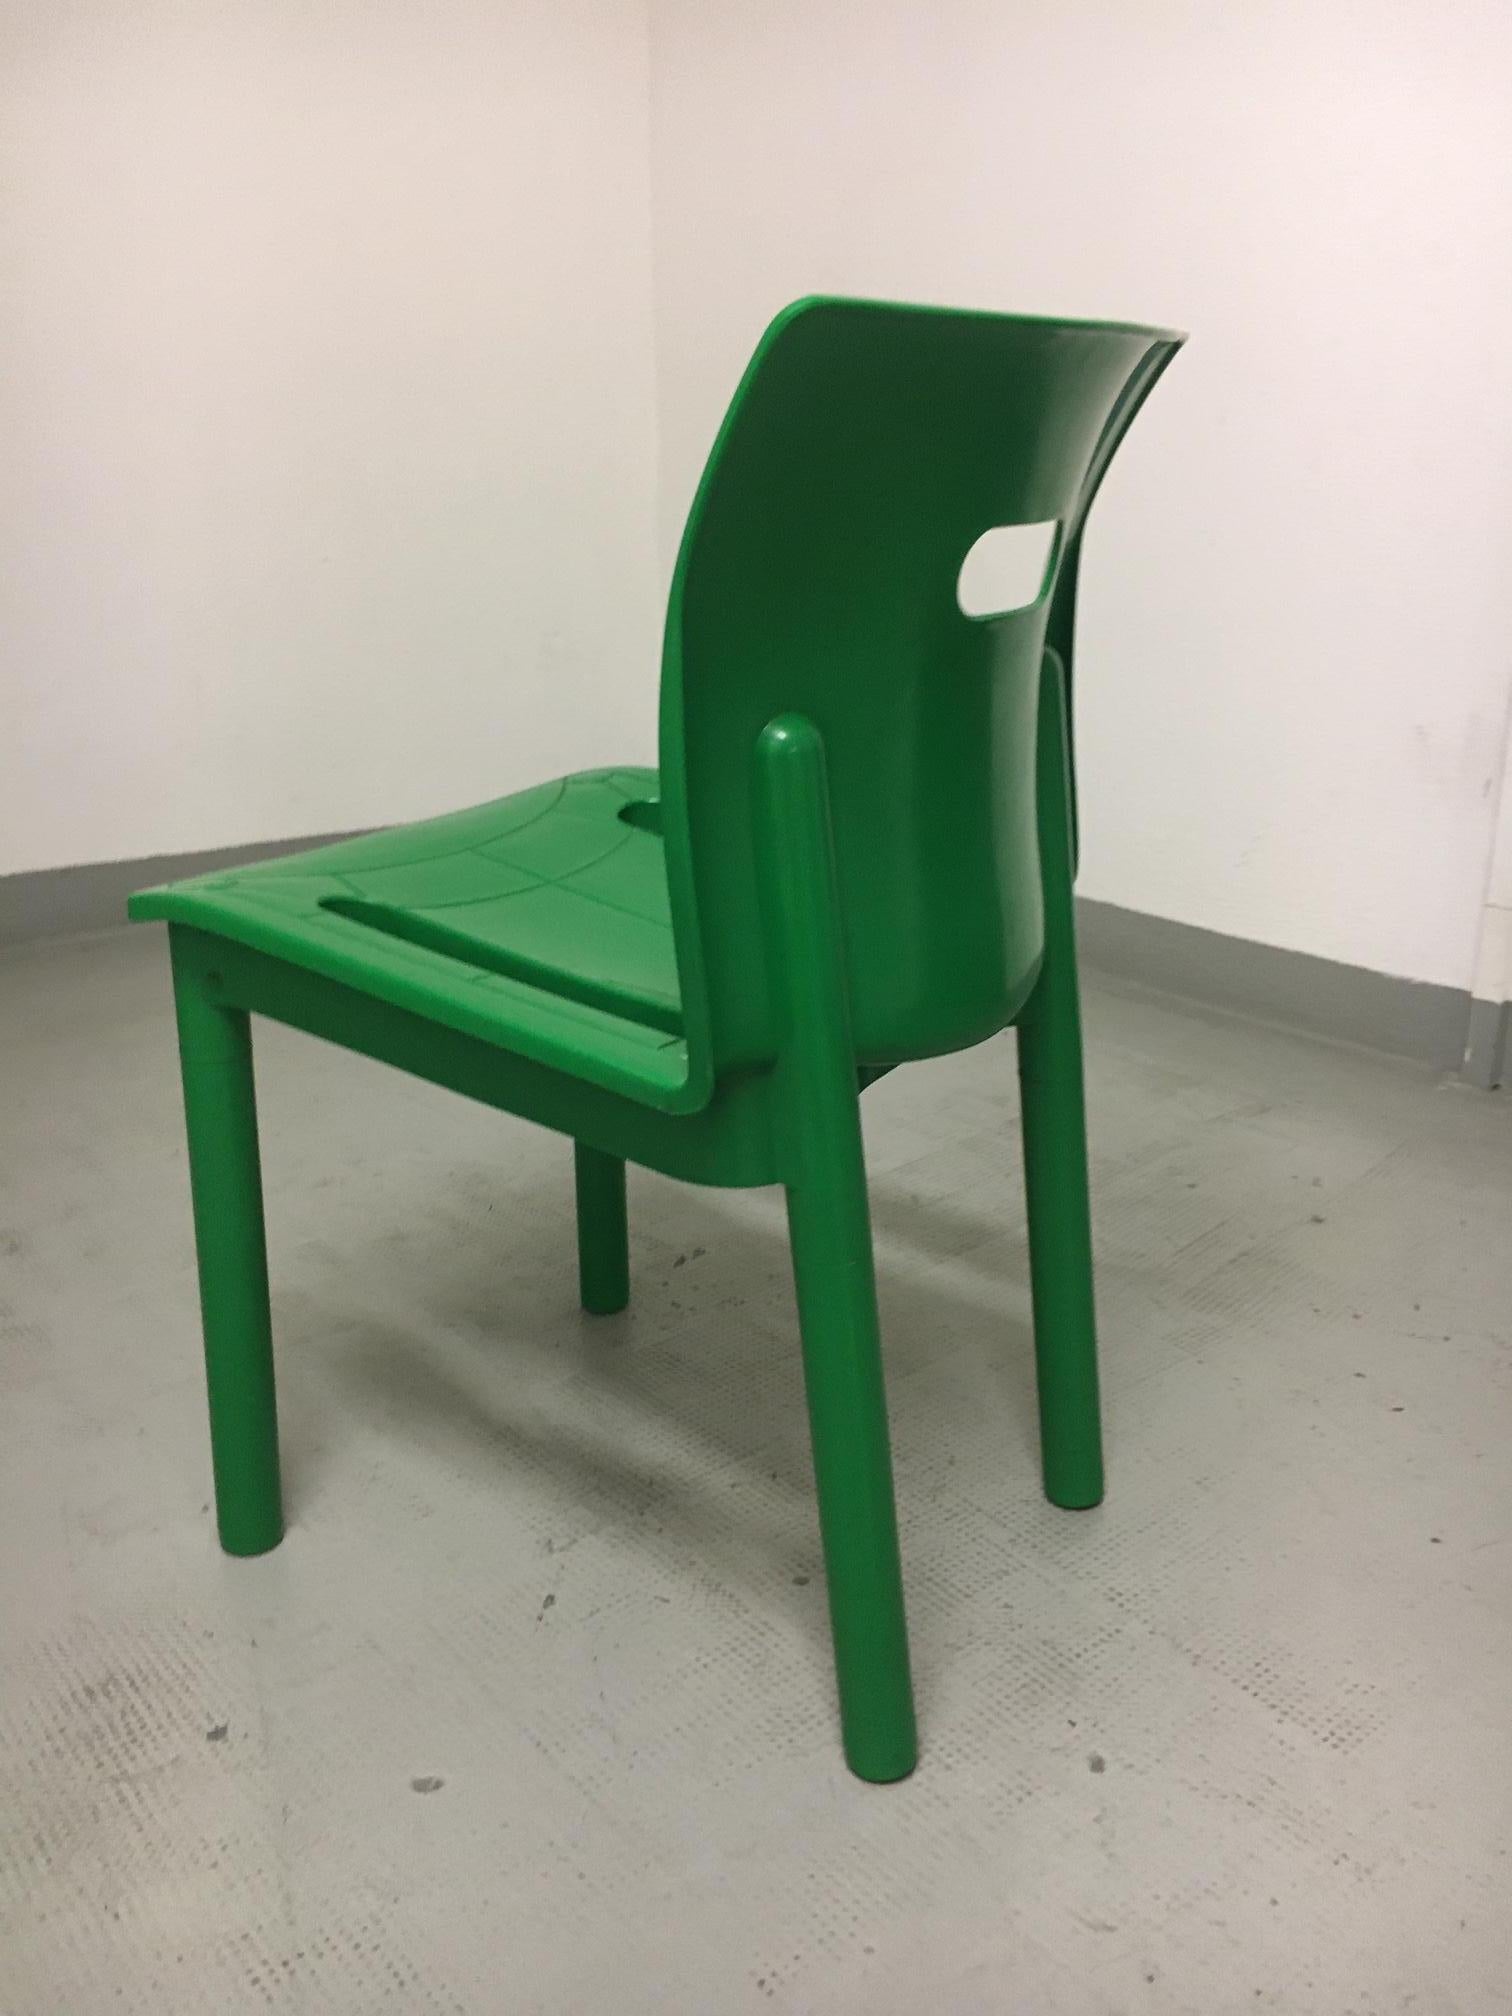 Vintage plastic stackable chair by Anna Castelli Ferrieri produced by Kartell, Italy, 1986
Winner of the Compasso d'oro 1986
Signed and dated.
        